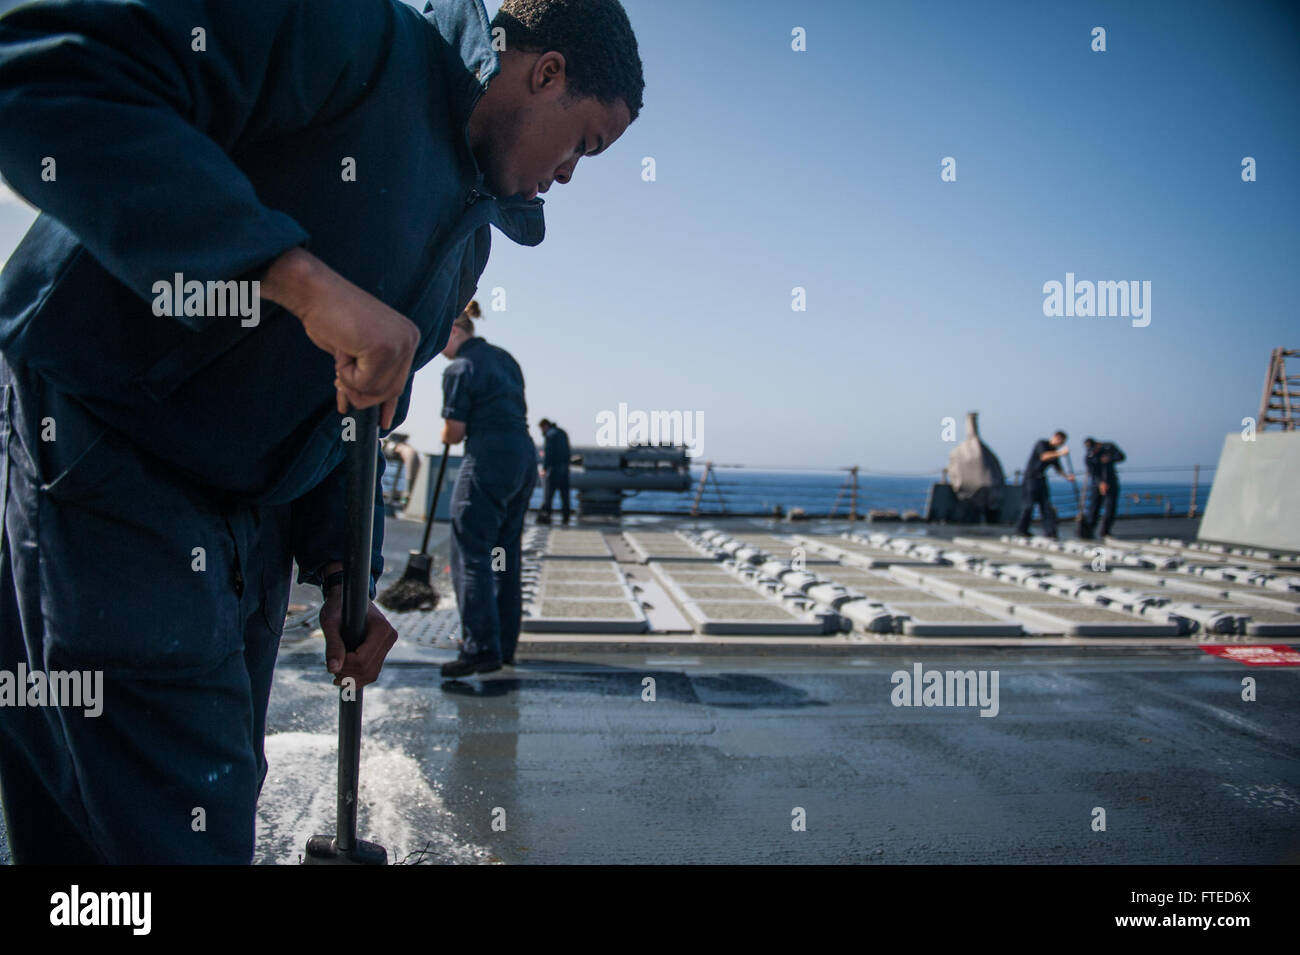 140408-N-EI510-004 MEDITERRANEAN SEA (April 08, 2014) - Sonar Technician (Surface) Seaman Apprentice Gregory Harris, from Lancaster, Texas, participates in a fresh water wash down aboard the Arleigh Burke-class guided-missile destroyer USS Truxtun (DDG 103). Truxtun is deployed as part of the George H.W. Bush Carrier Strike Group on a scheduled deployment supporting maritime security operations and theater security cooperation efforts in the U.S. 5th Fleet area of responsibility. (U.S. Navy photo by Mass Communication Specialist 3rd Class Scott Barnes/Released) Stock Photo